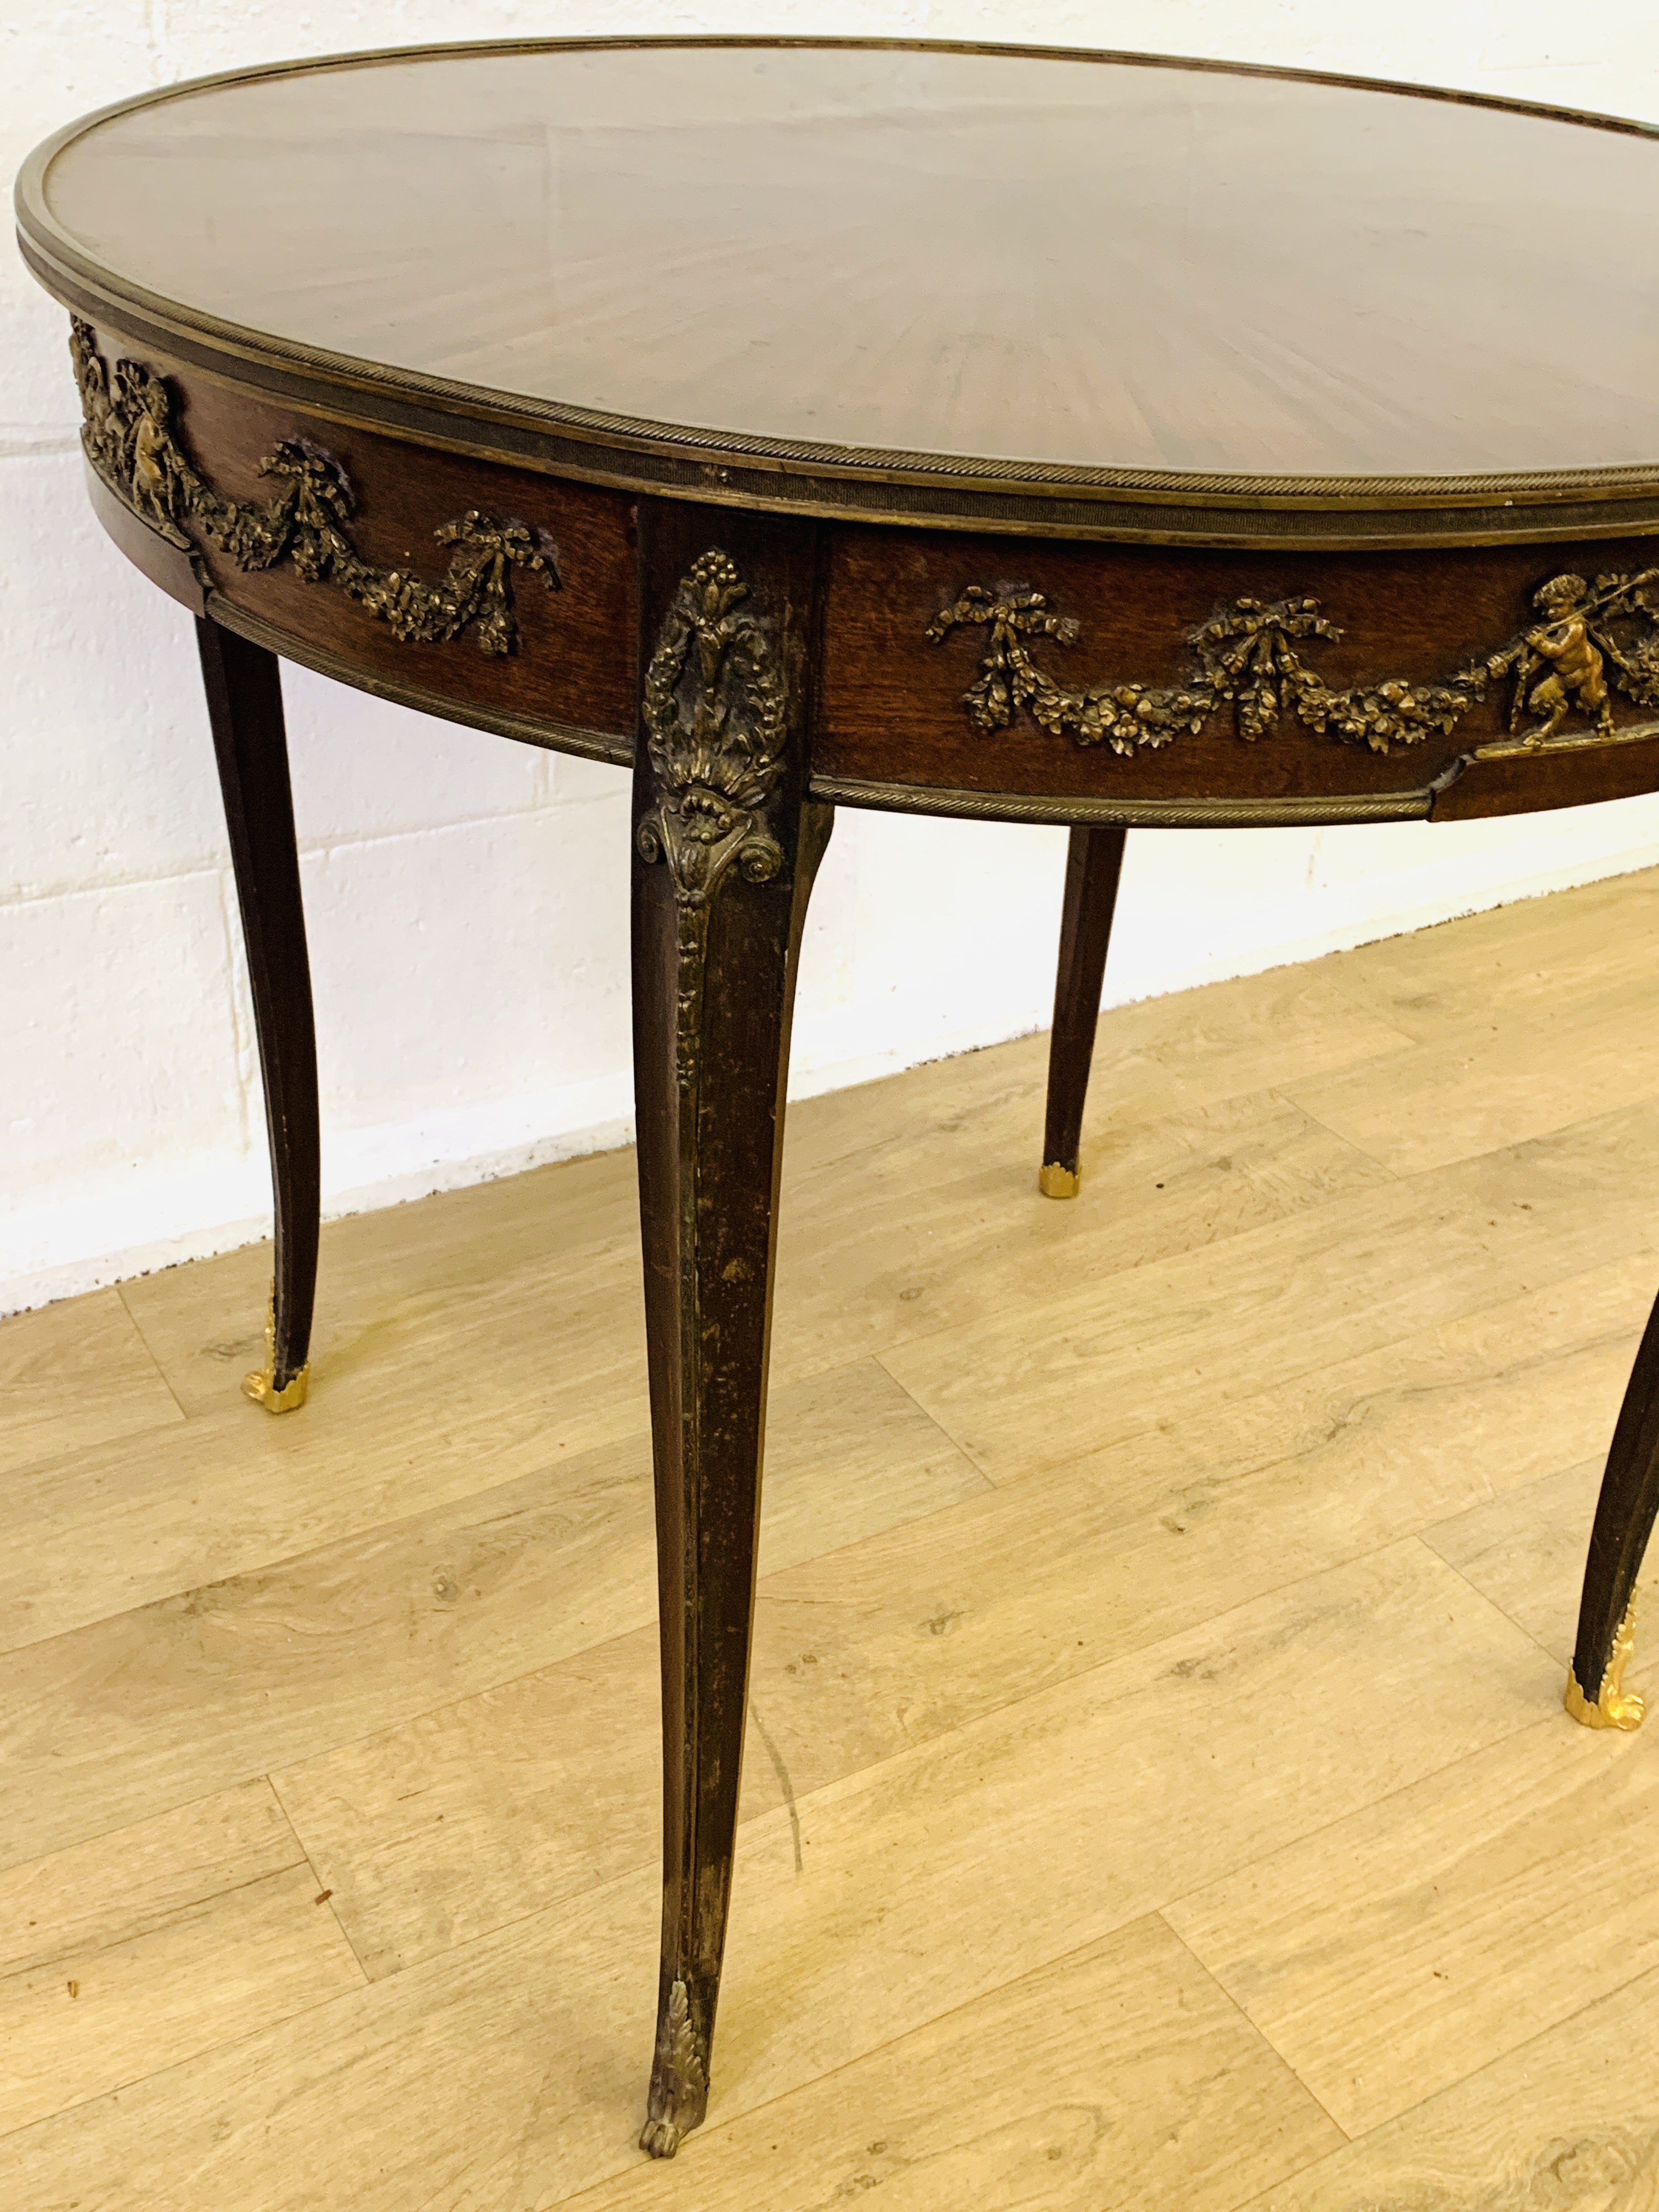 French empire style display table - Image 3 of 8